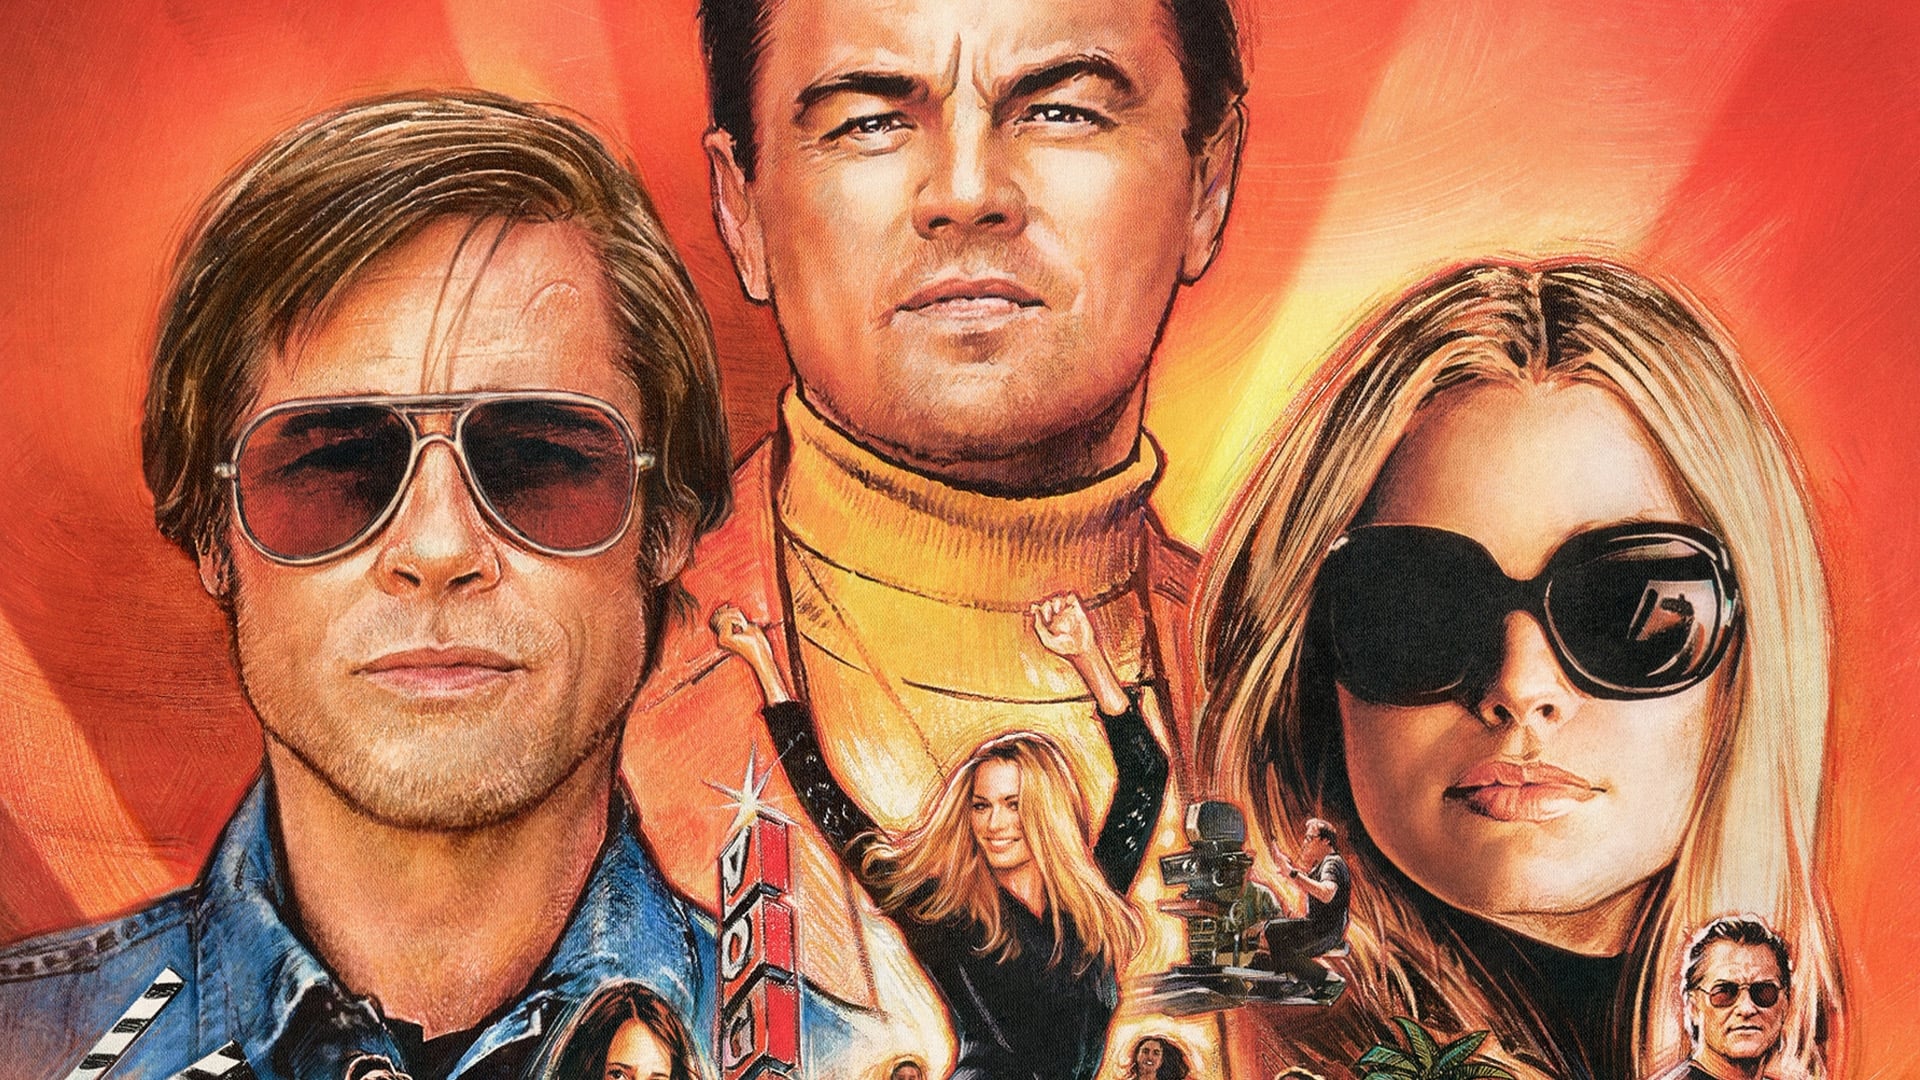 Image du film Once Upon a Time... in Hollywood (version longue) z5qz9oxdcq81jkdkhtghapxy6pjjpg